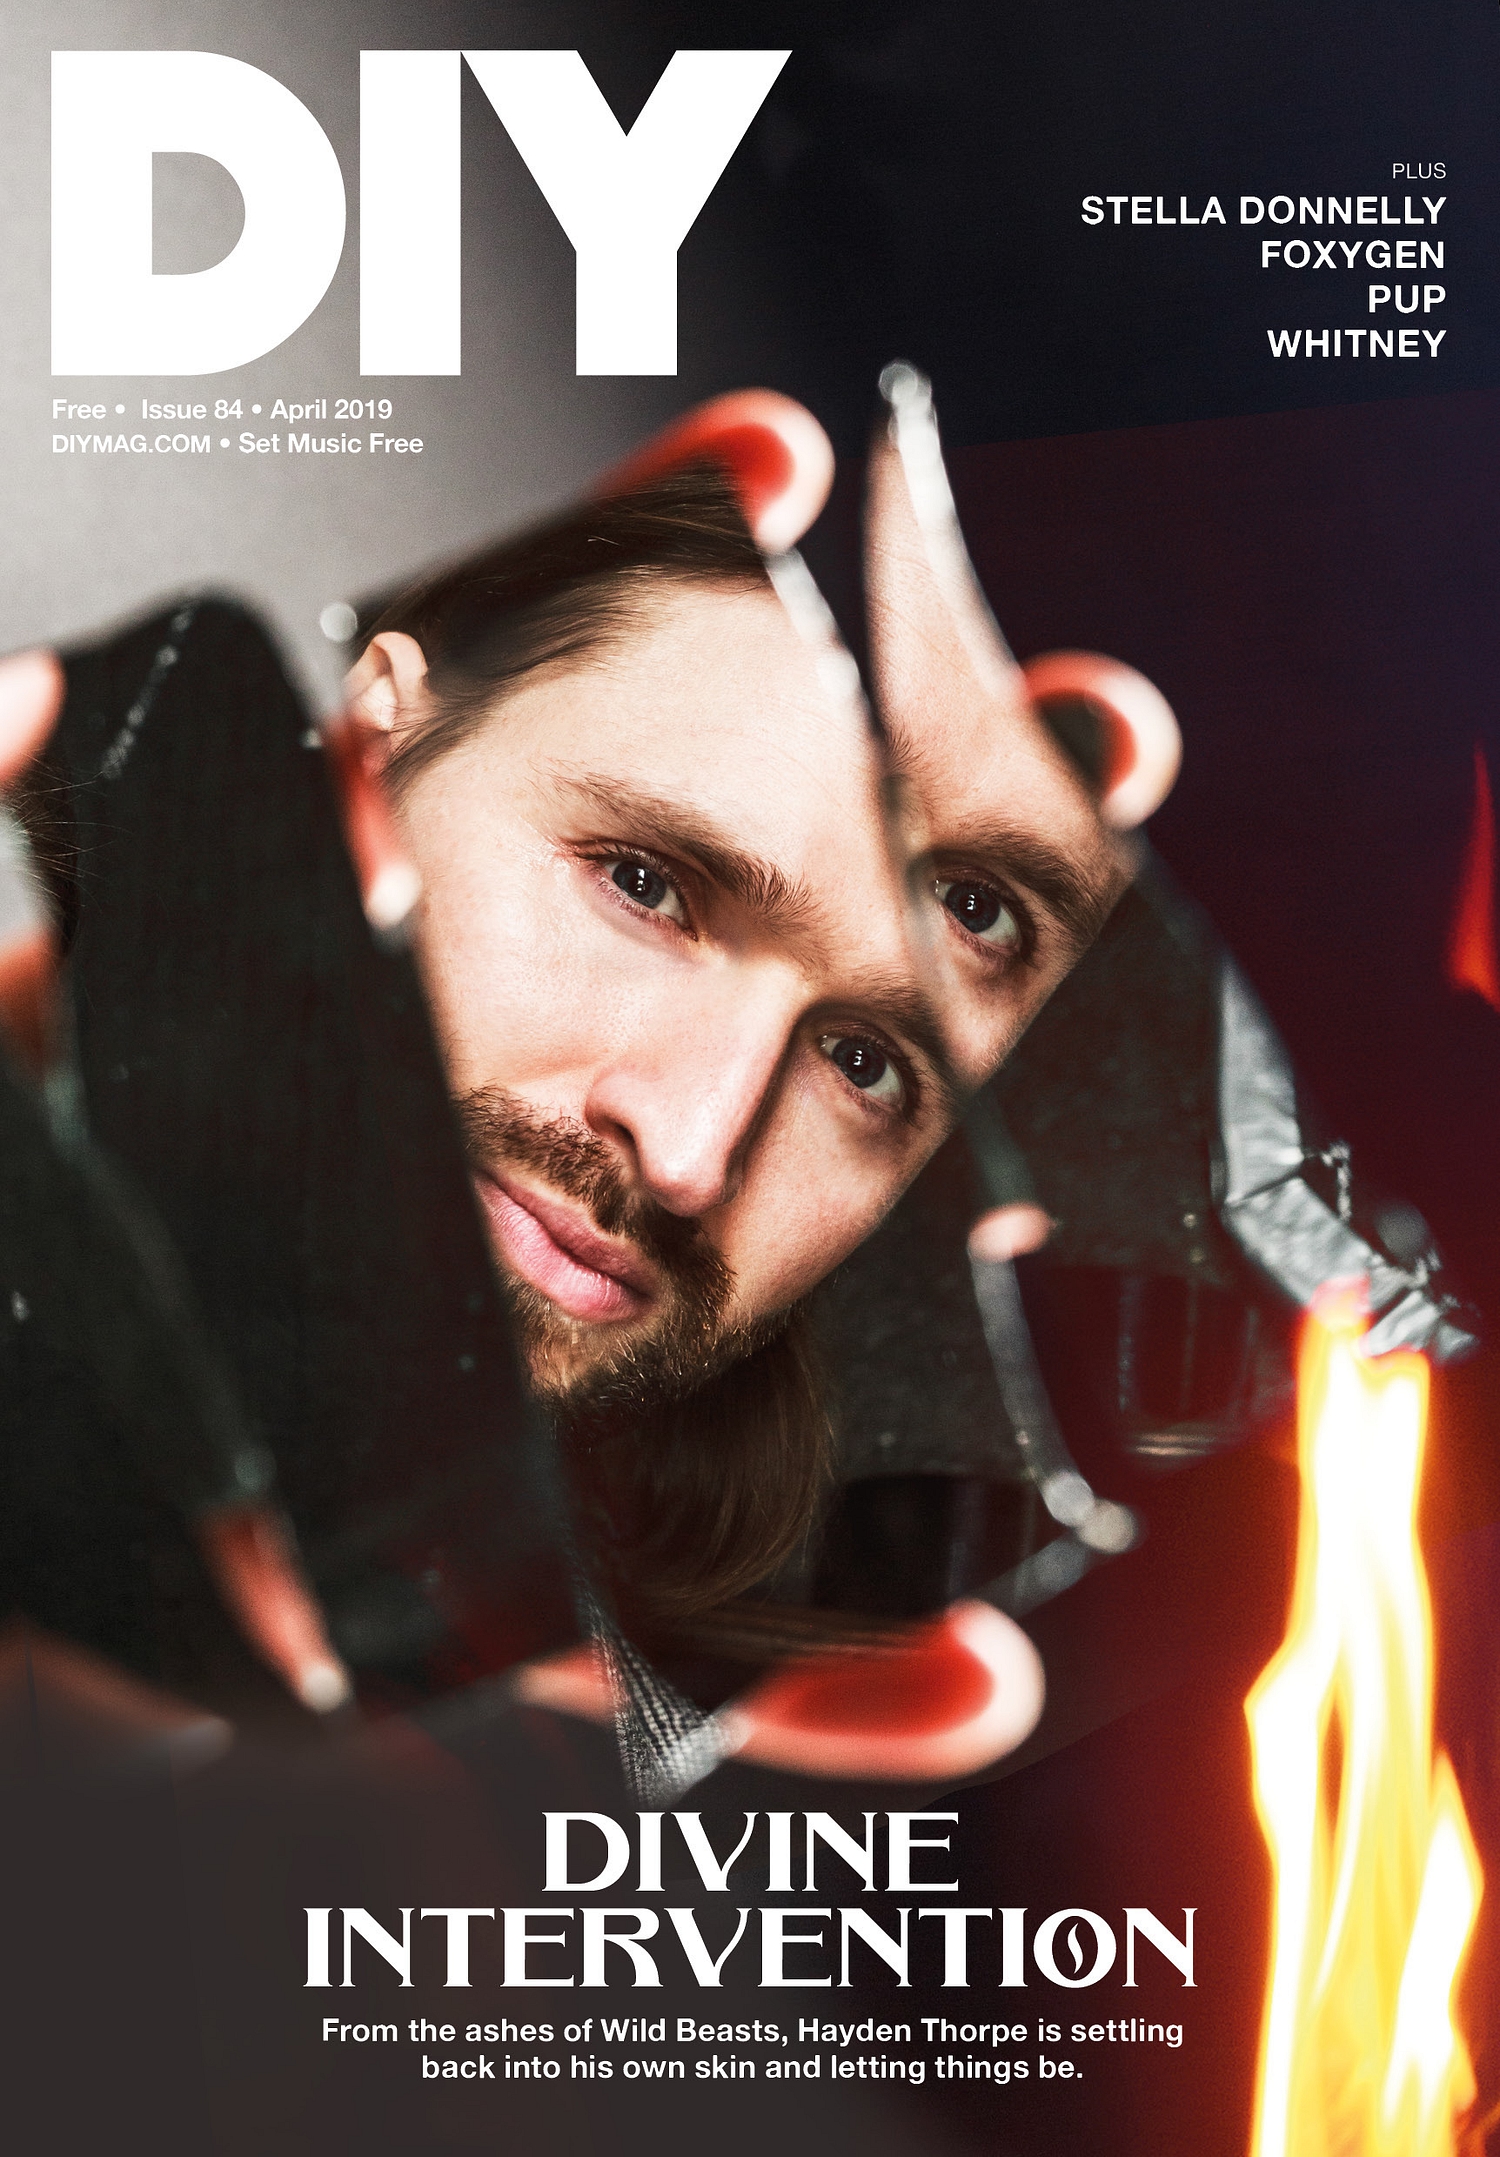 Hayden Thorpe fronts the April issue of DIY